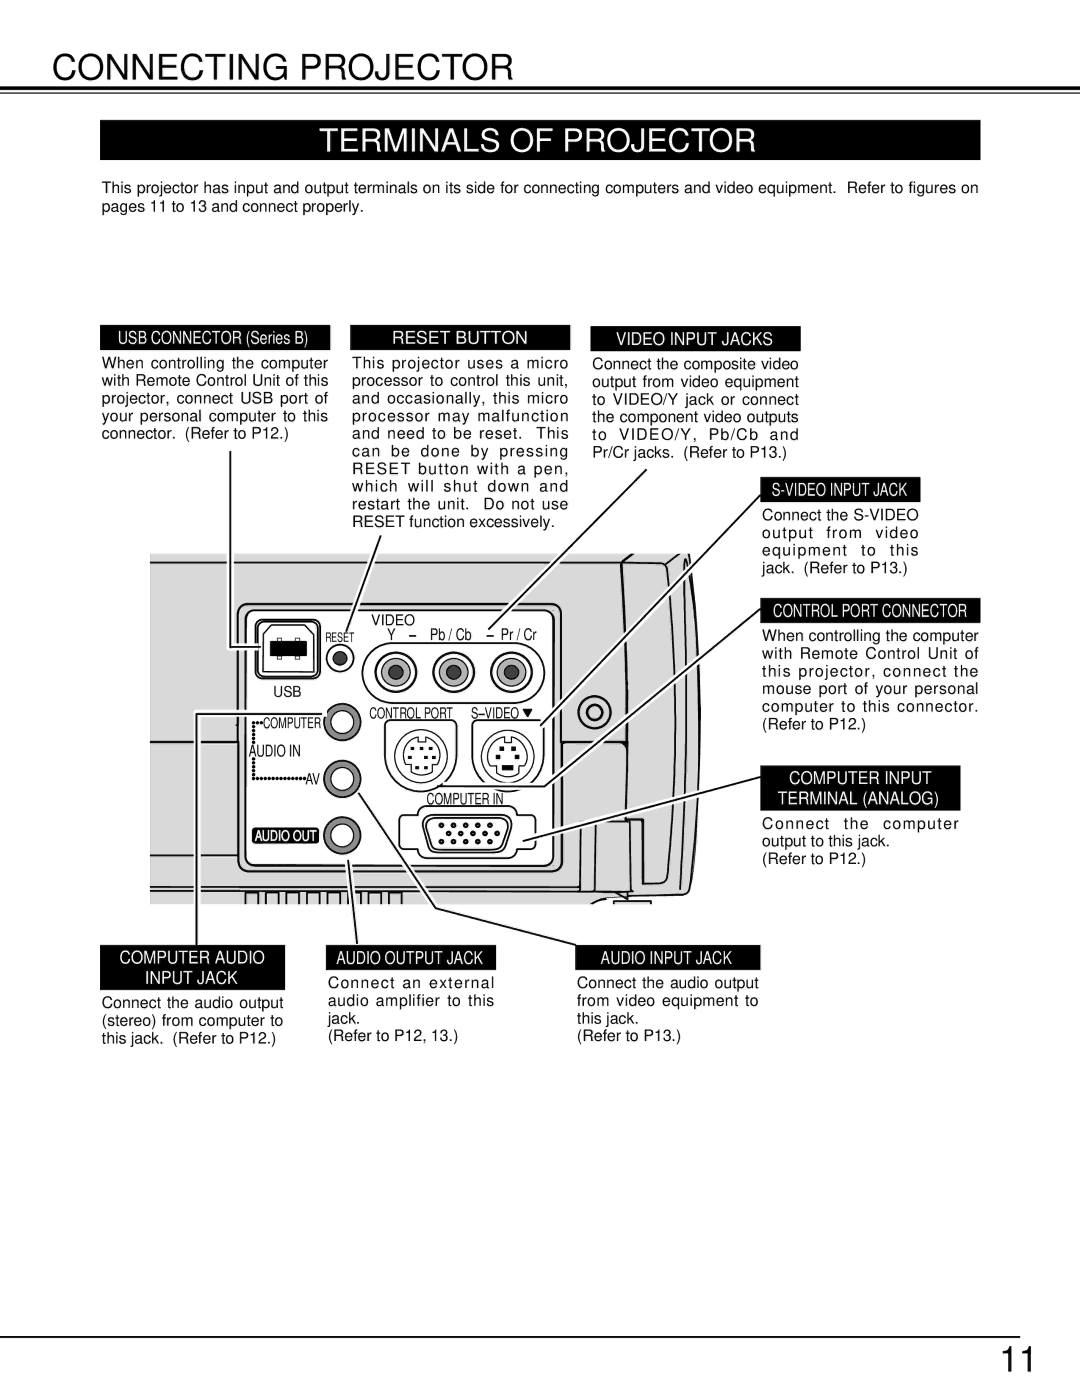 Eiki LC-SM3 owner manual Connecting Projector, Terminals of Projector, USB Connector Series B, Computer 